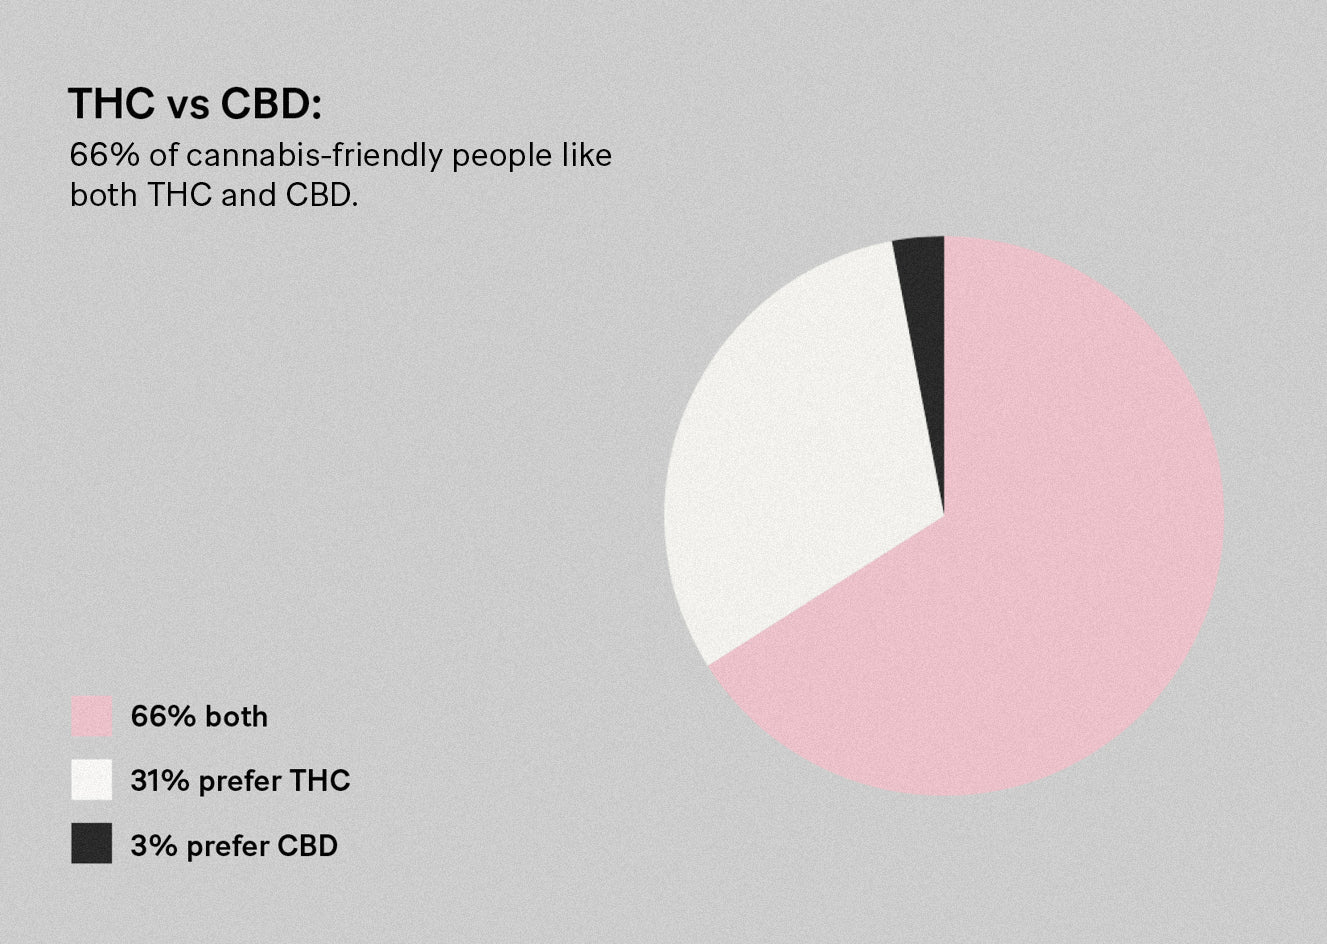 Infographic pie chart showing that 66% of cannabis-friendly like both THC and CBD.